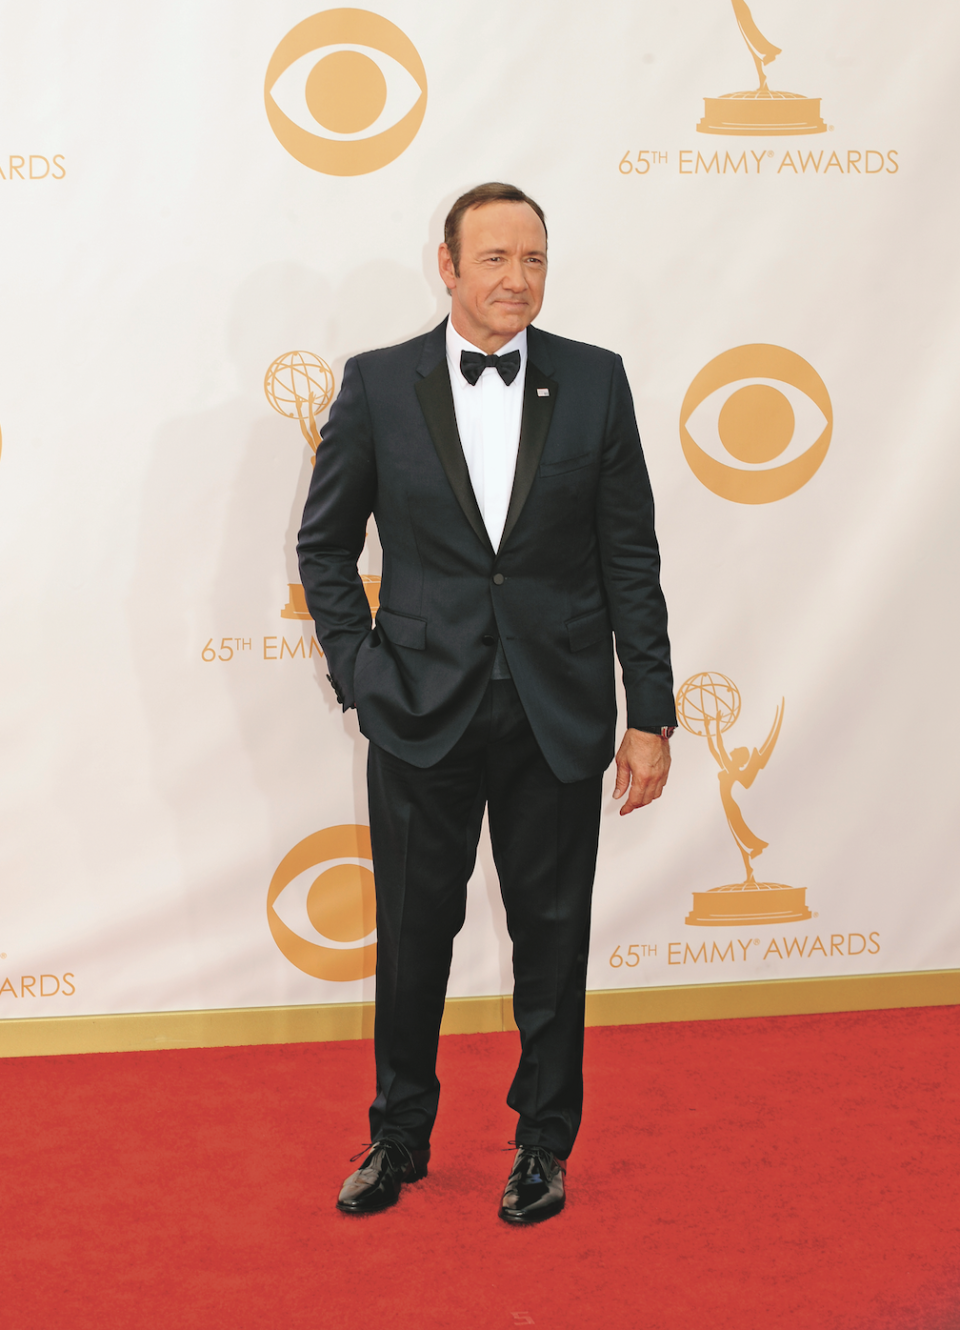 Kevin Spacey at the 65th Annual Primetime Emmy Awards held at Nokia Theatre L.A. Live on September 22, 2013 in Los Angeles, California.